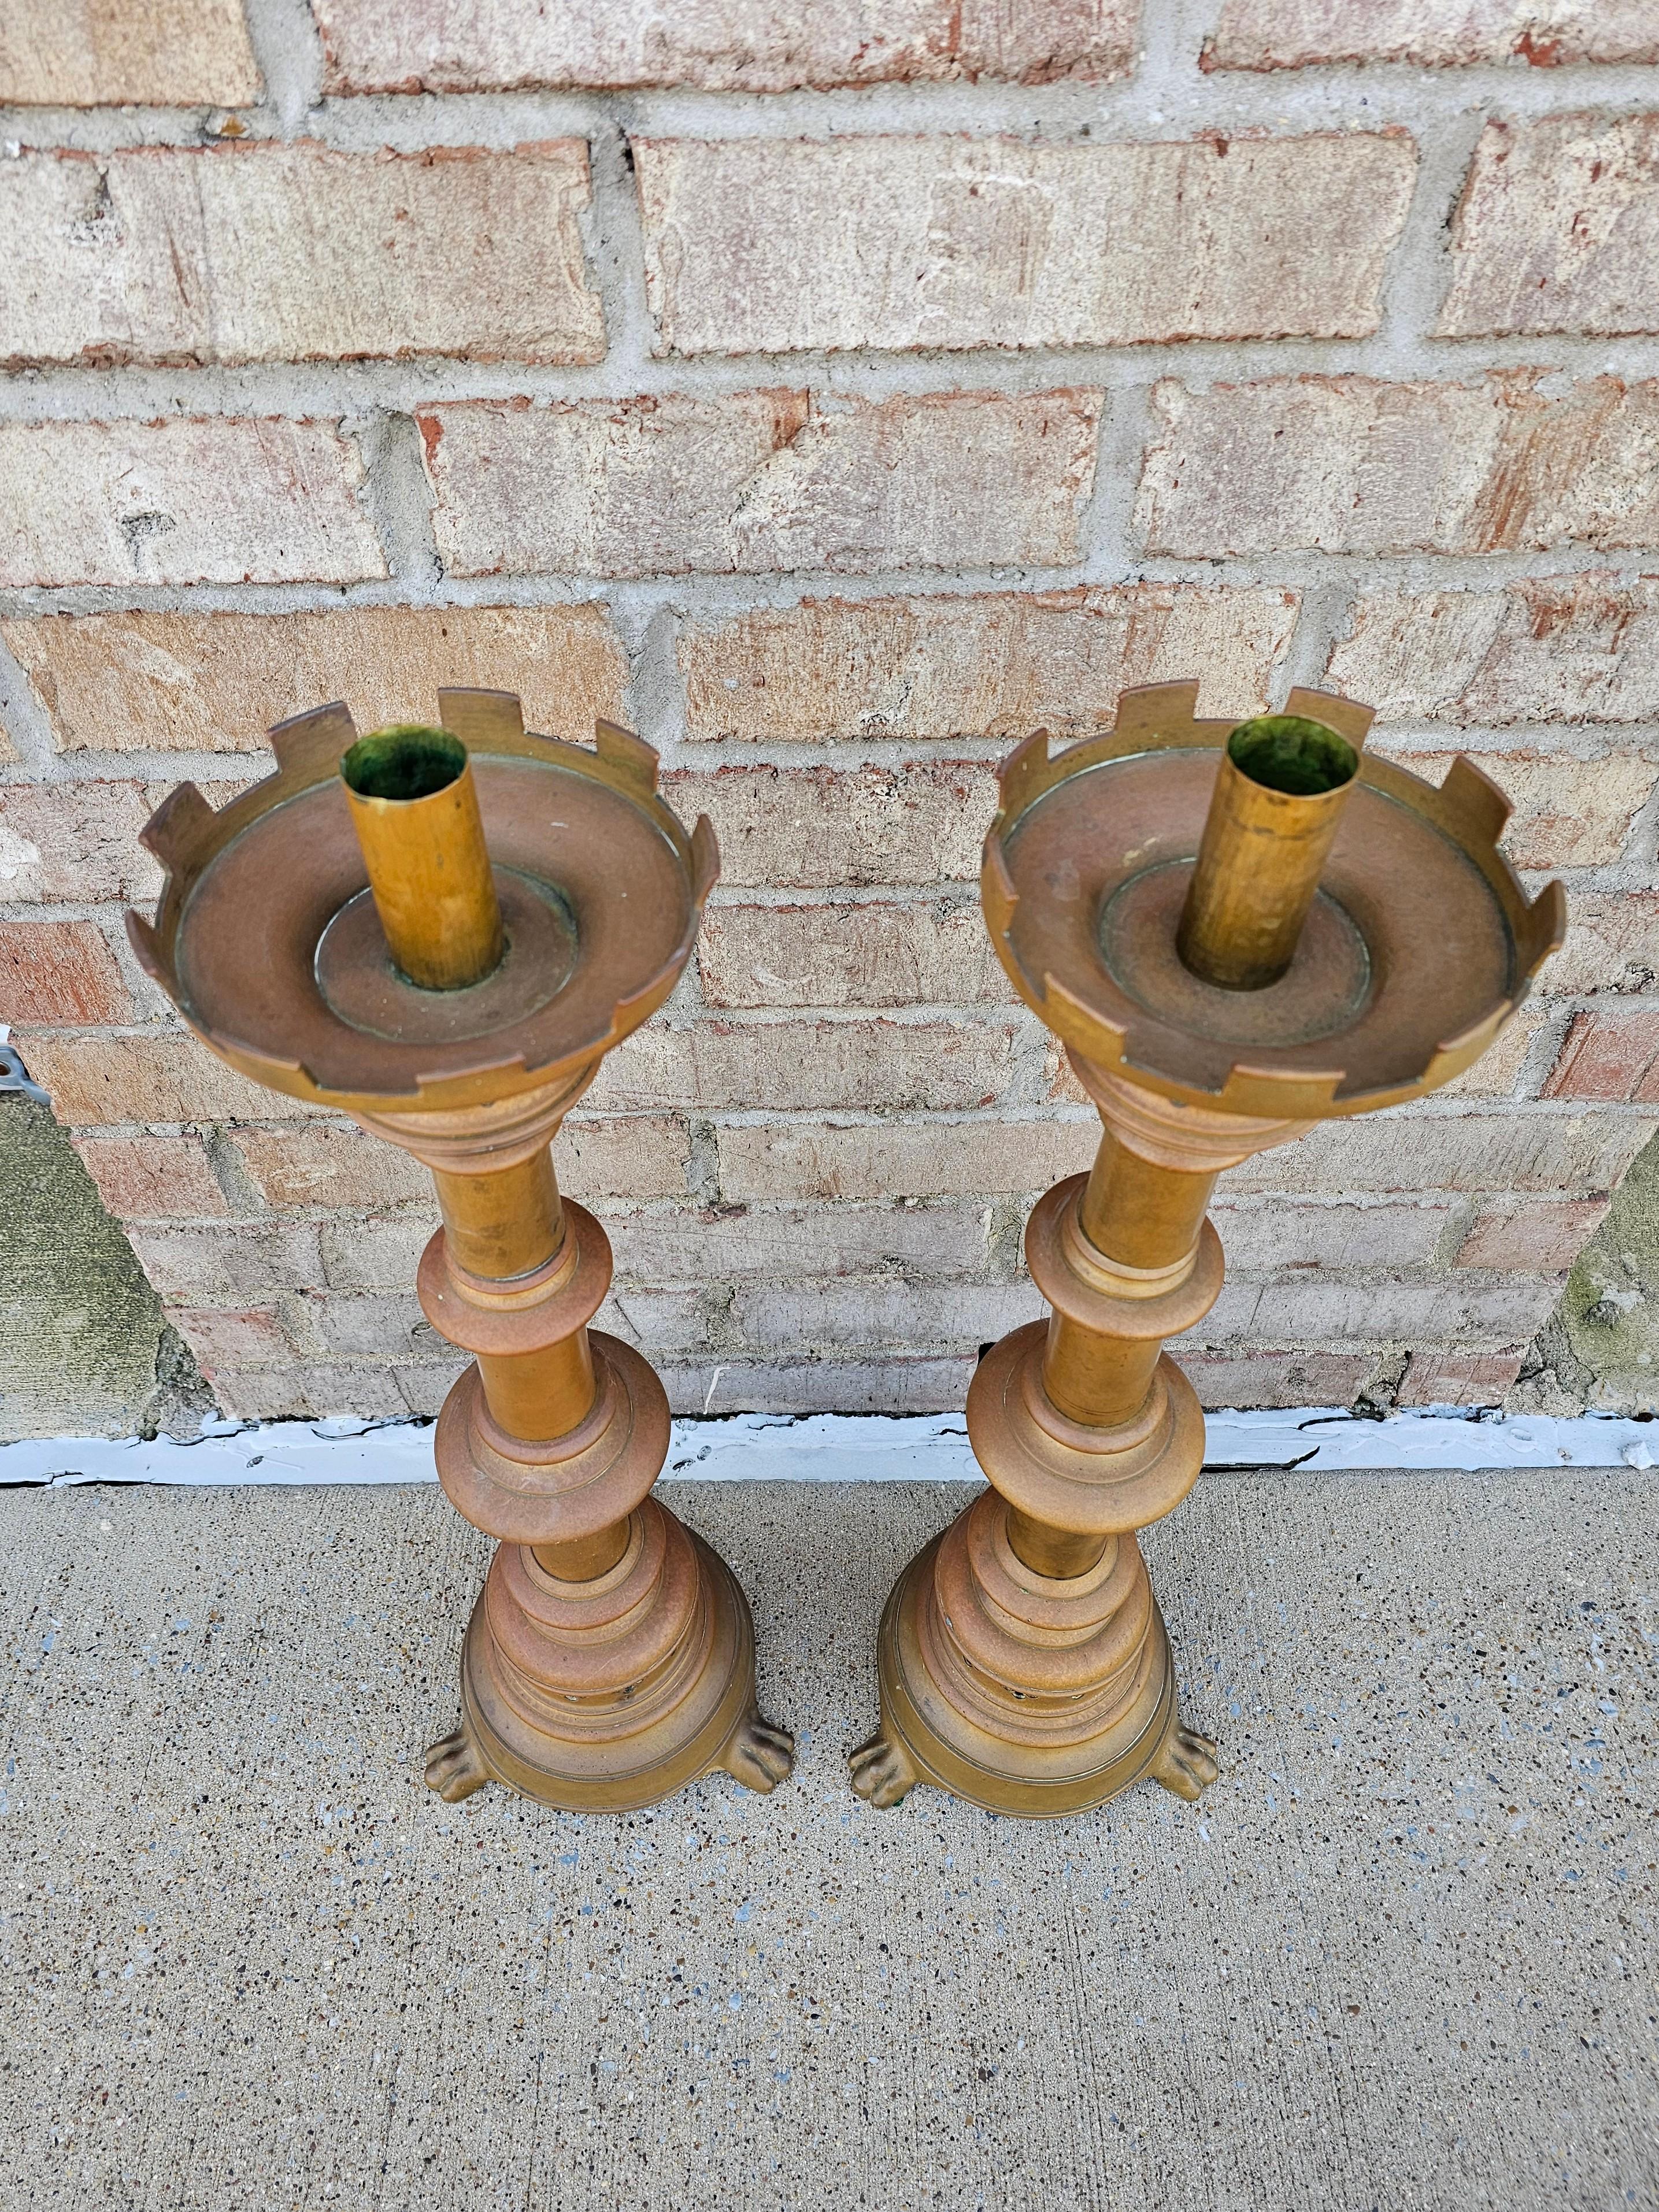 19th Century Gothic Revival Bronze Altar Candlestick Pair  For Sale 4